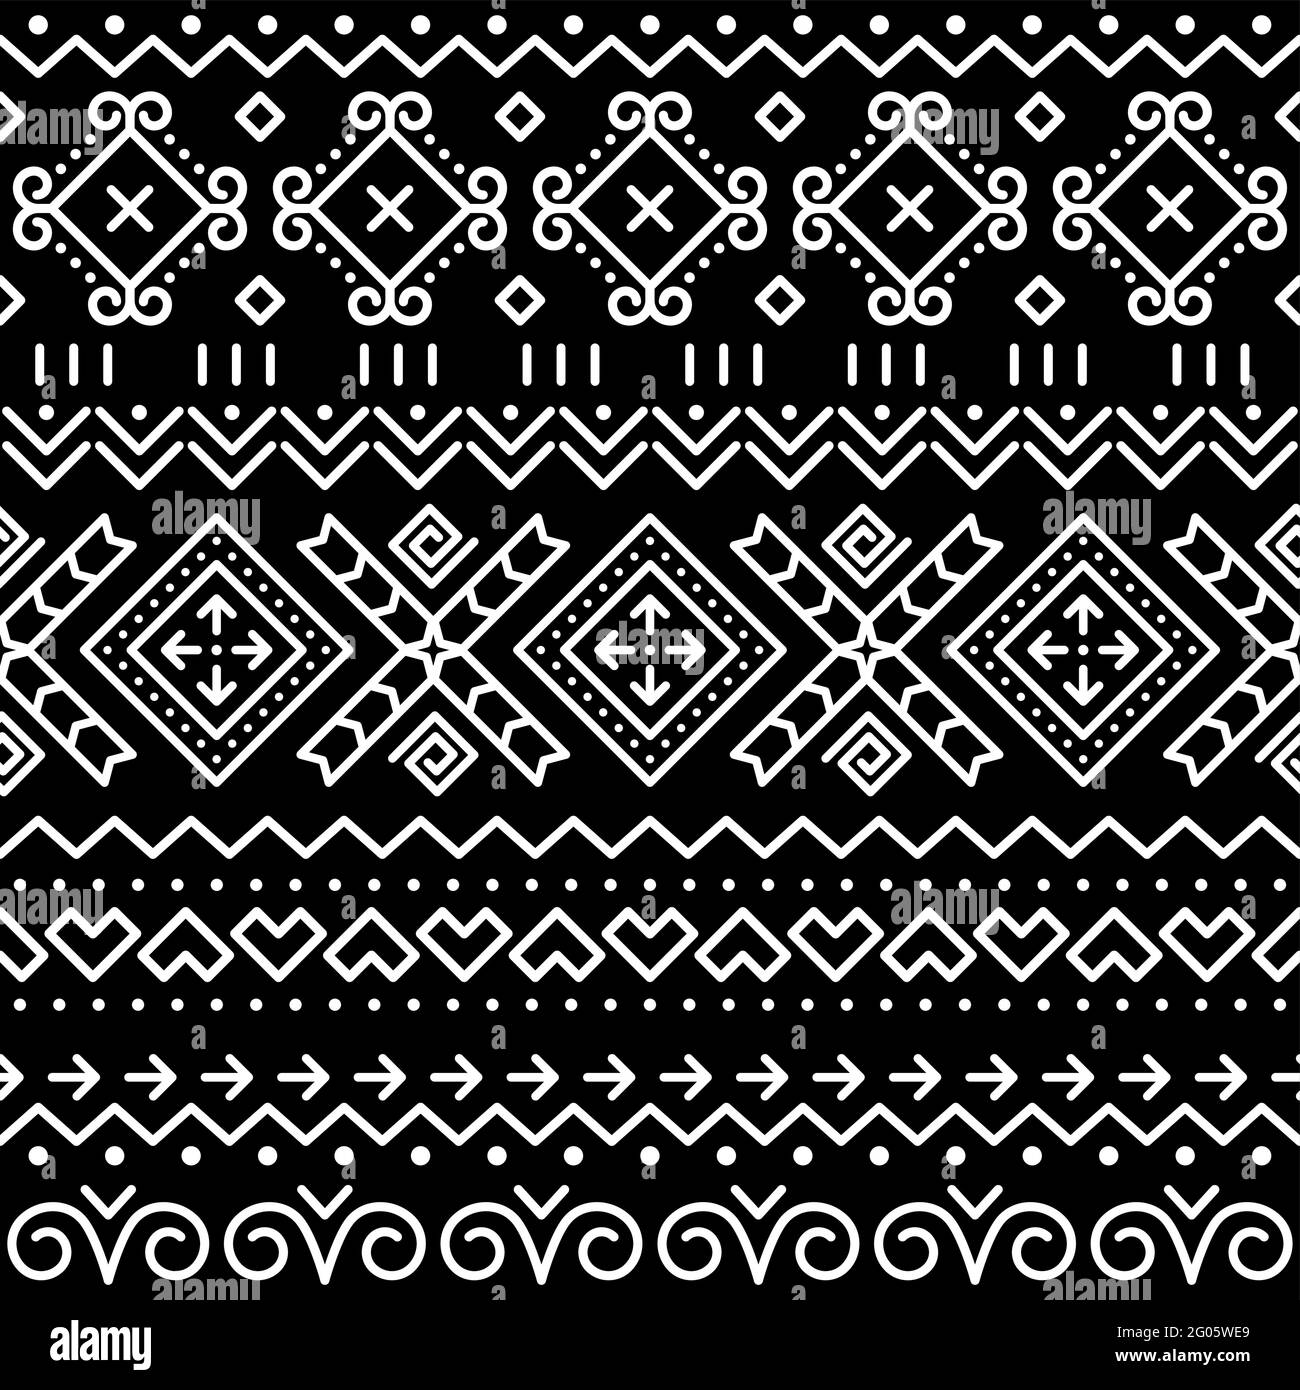 Folk art vector seamless geometric pattern from Slovakia, ethnic ornament inspired by traditional painted houses from village Cicmany in Zilina region Stock Vector